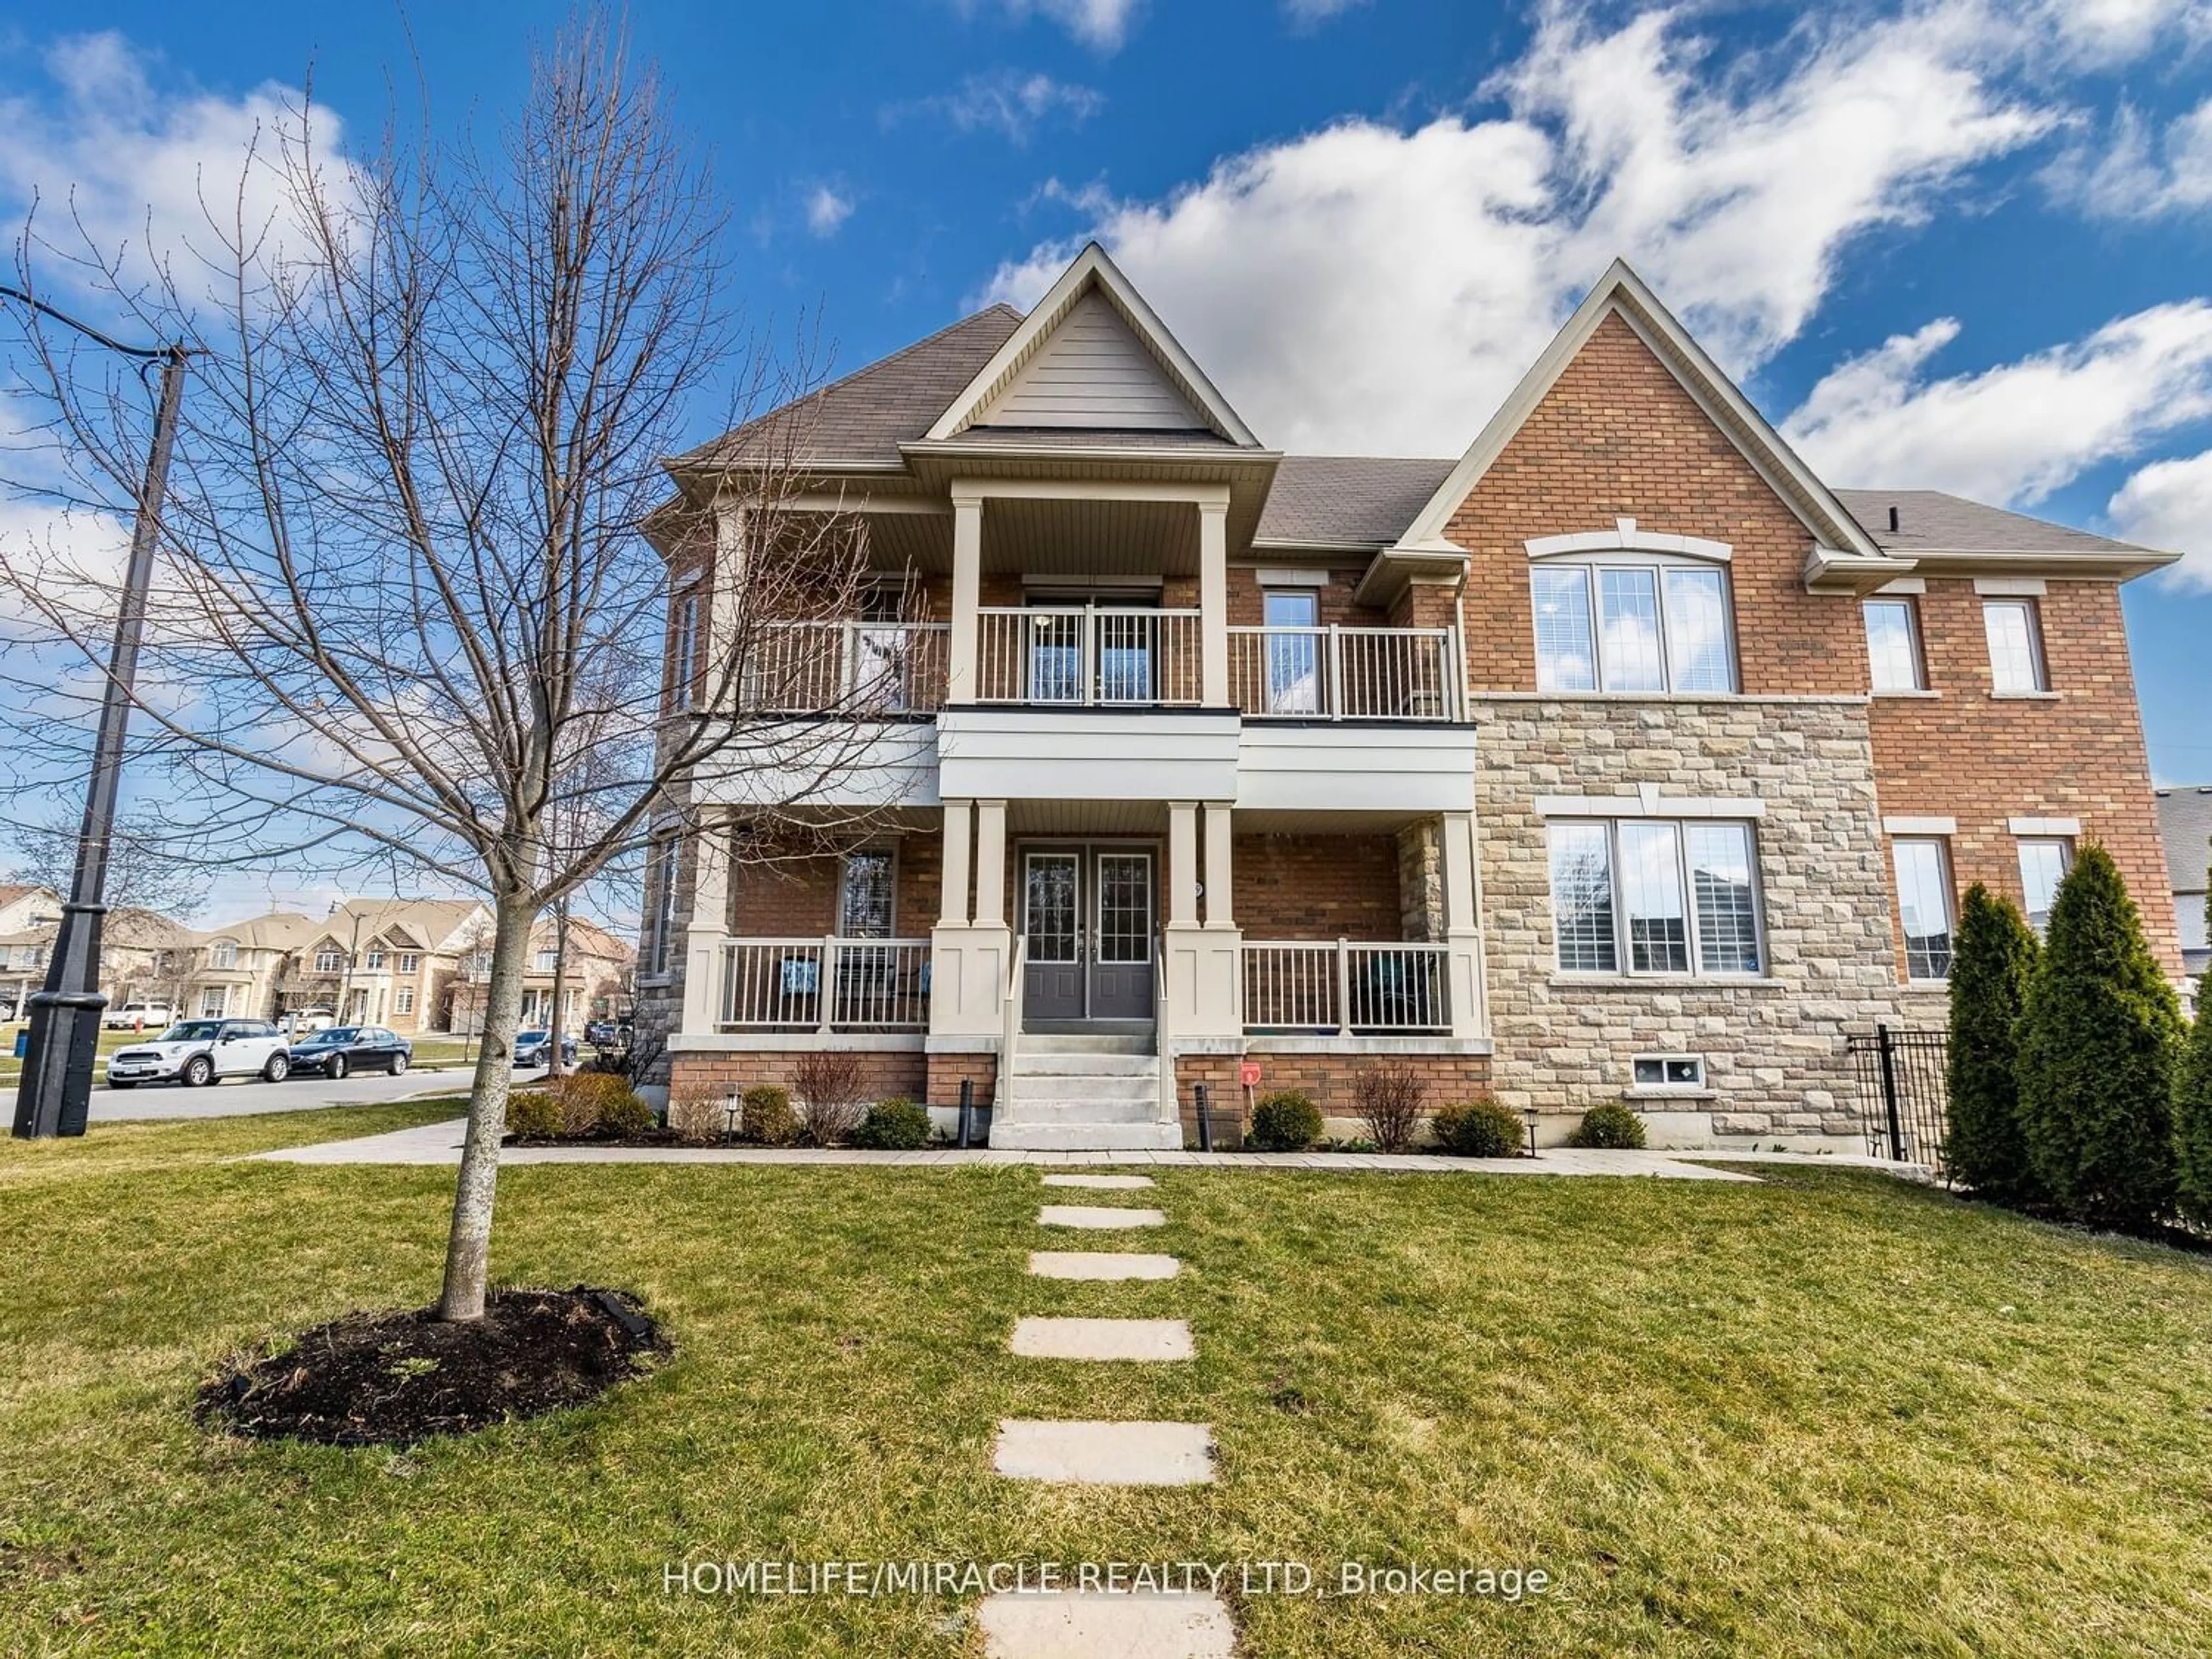 Home with brick exterior material for 129 Leadership Dr, Brampton Ontario L6Y 5T2